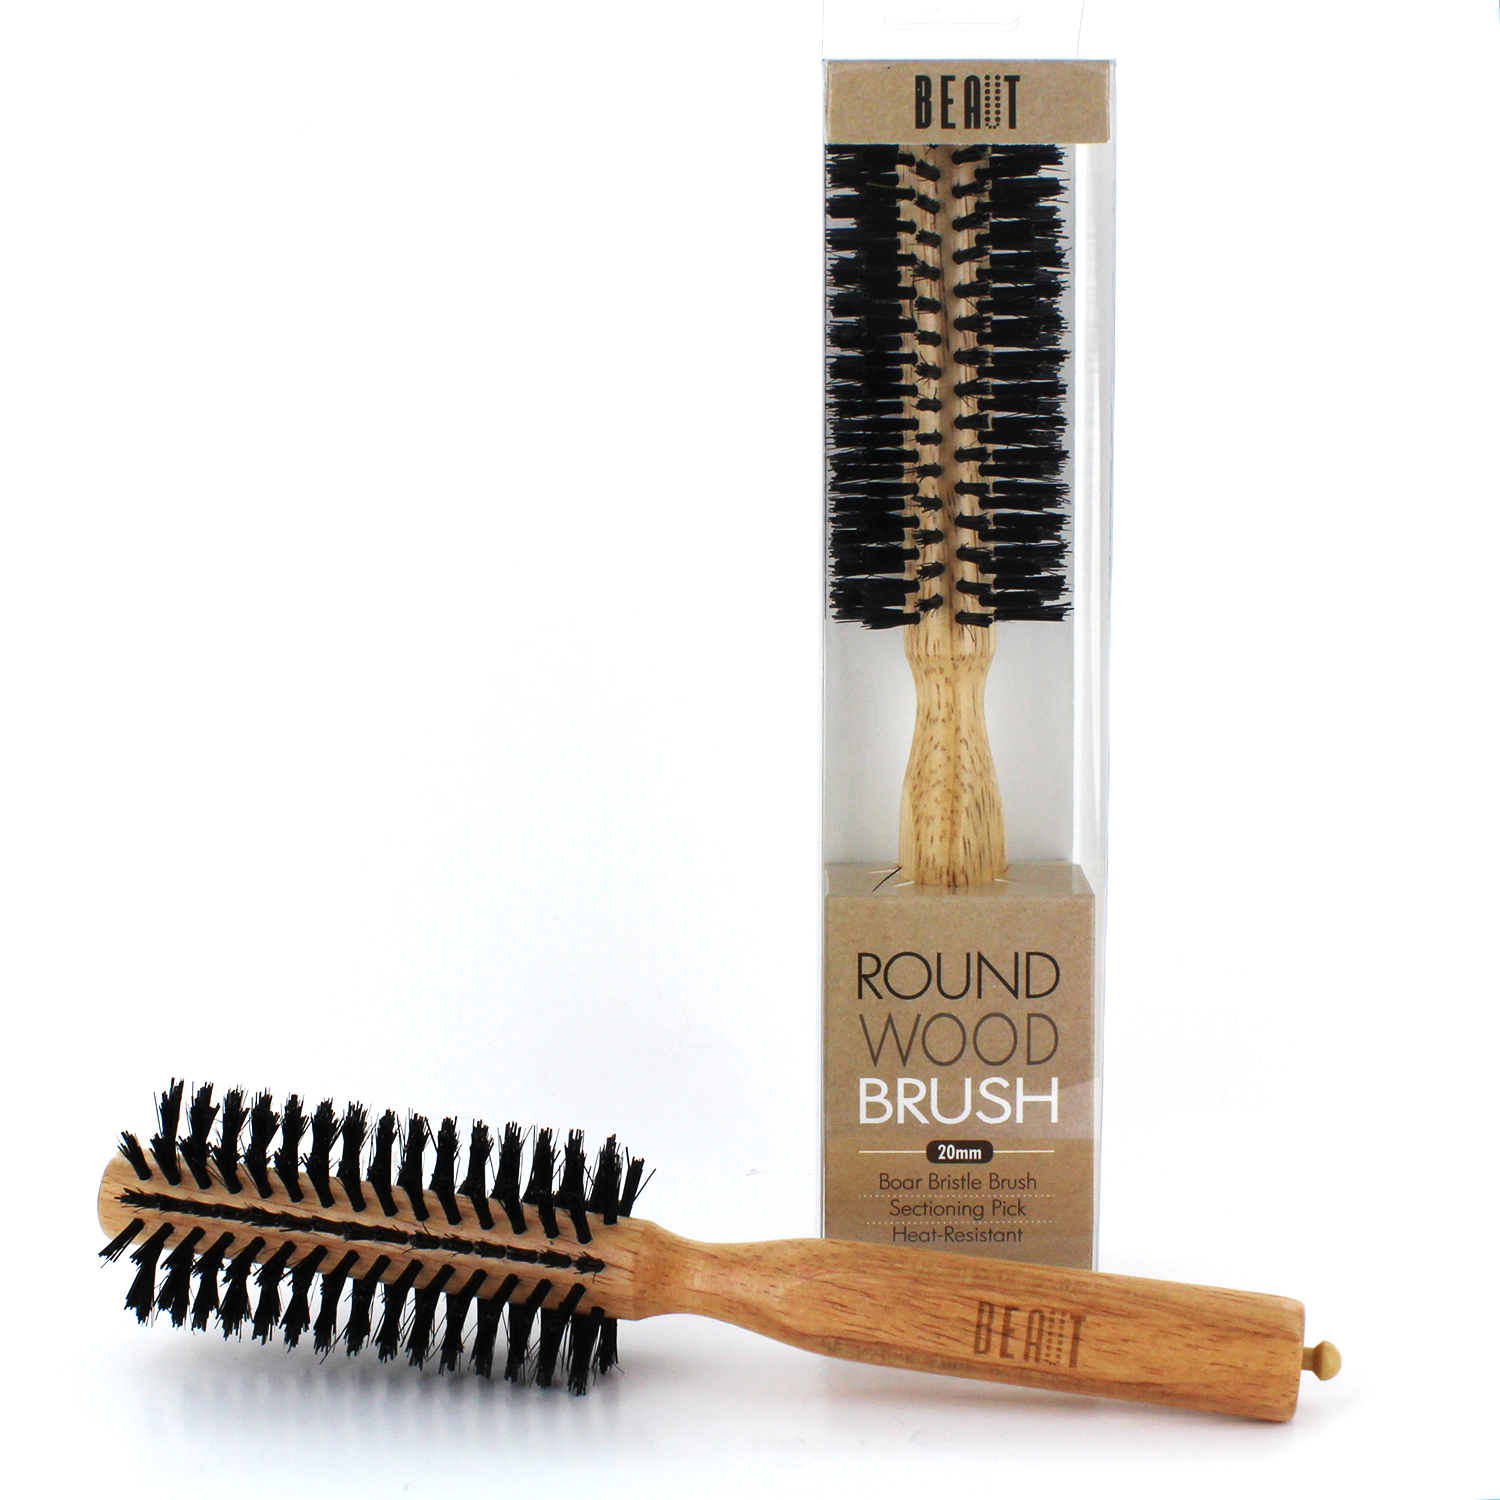 Beaut Round Wood Brush 20mm - VIP Extensions